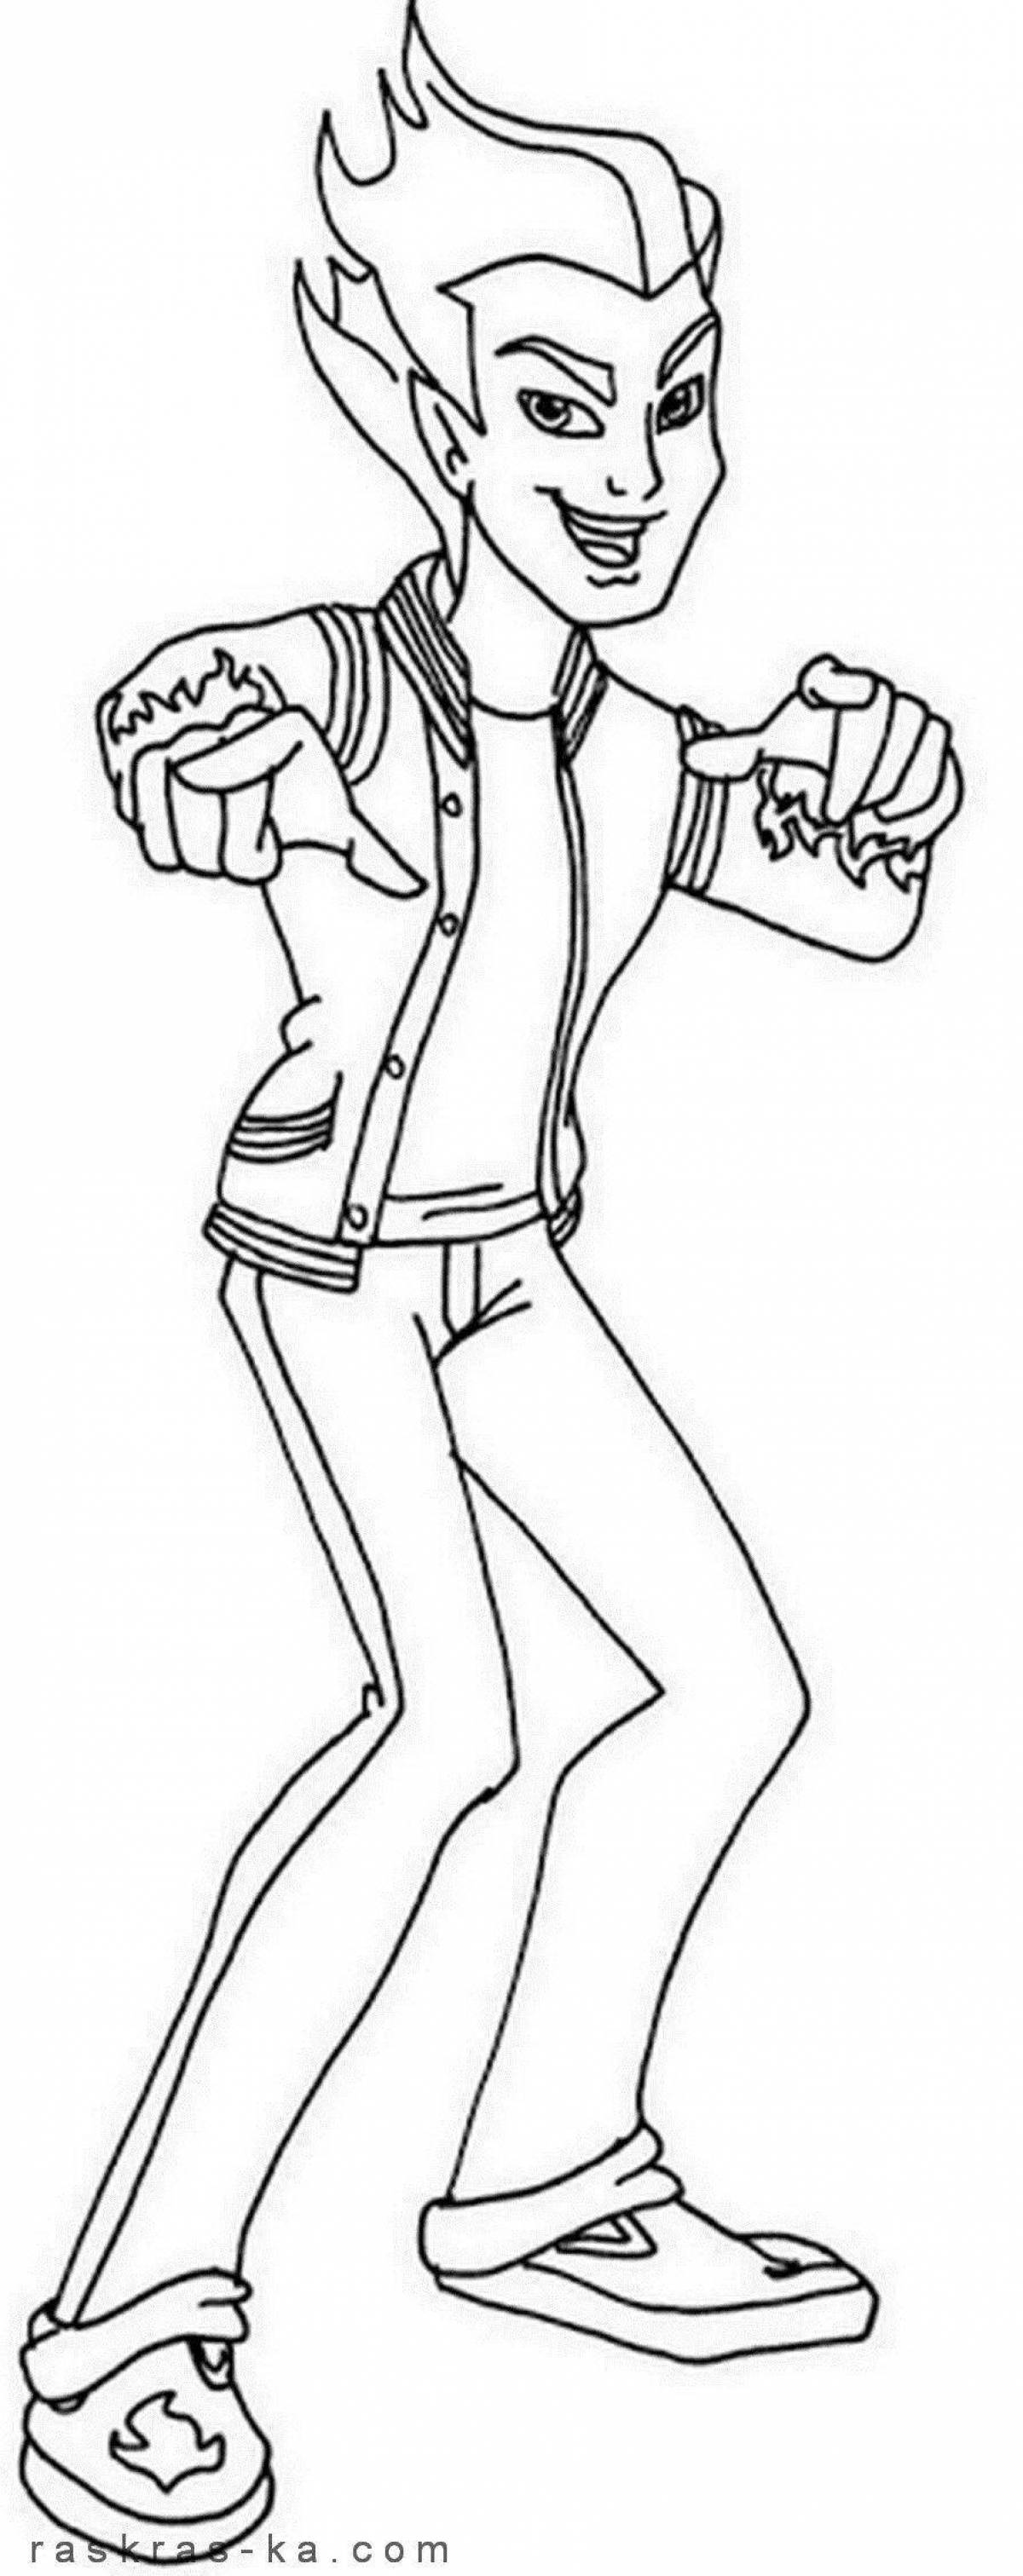 Monster high boys awesome coloring pages